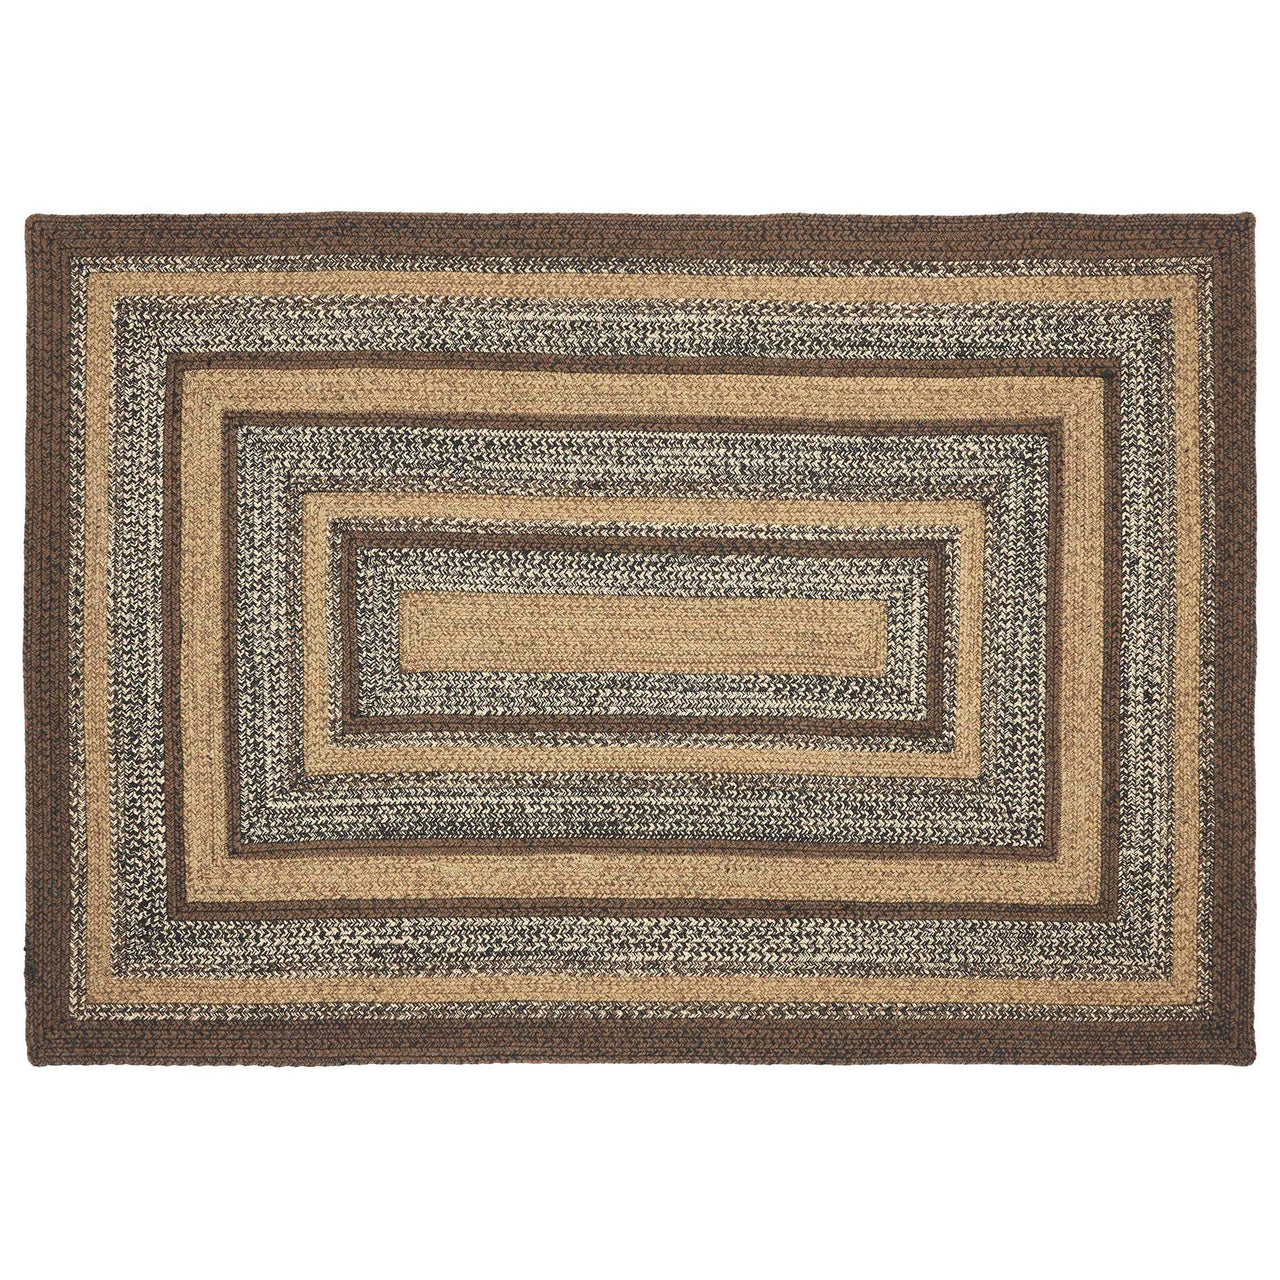 Espresso Jute Braided Rug Rect with Rug Pad 4'x6' VHC Brands